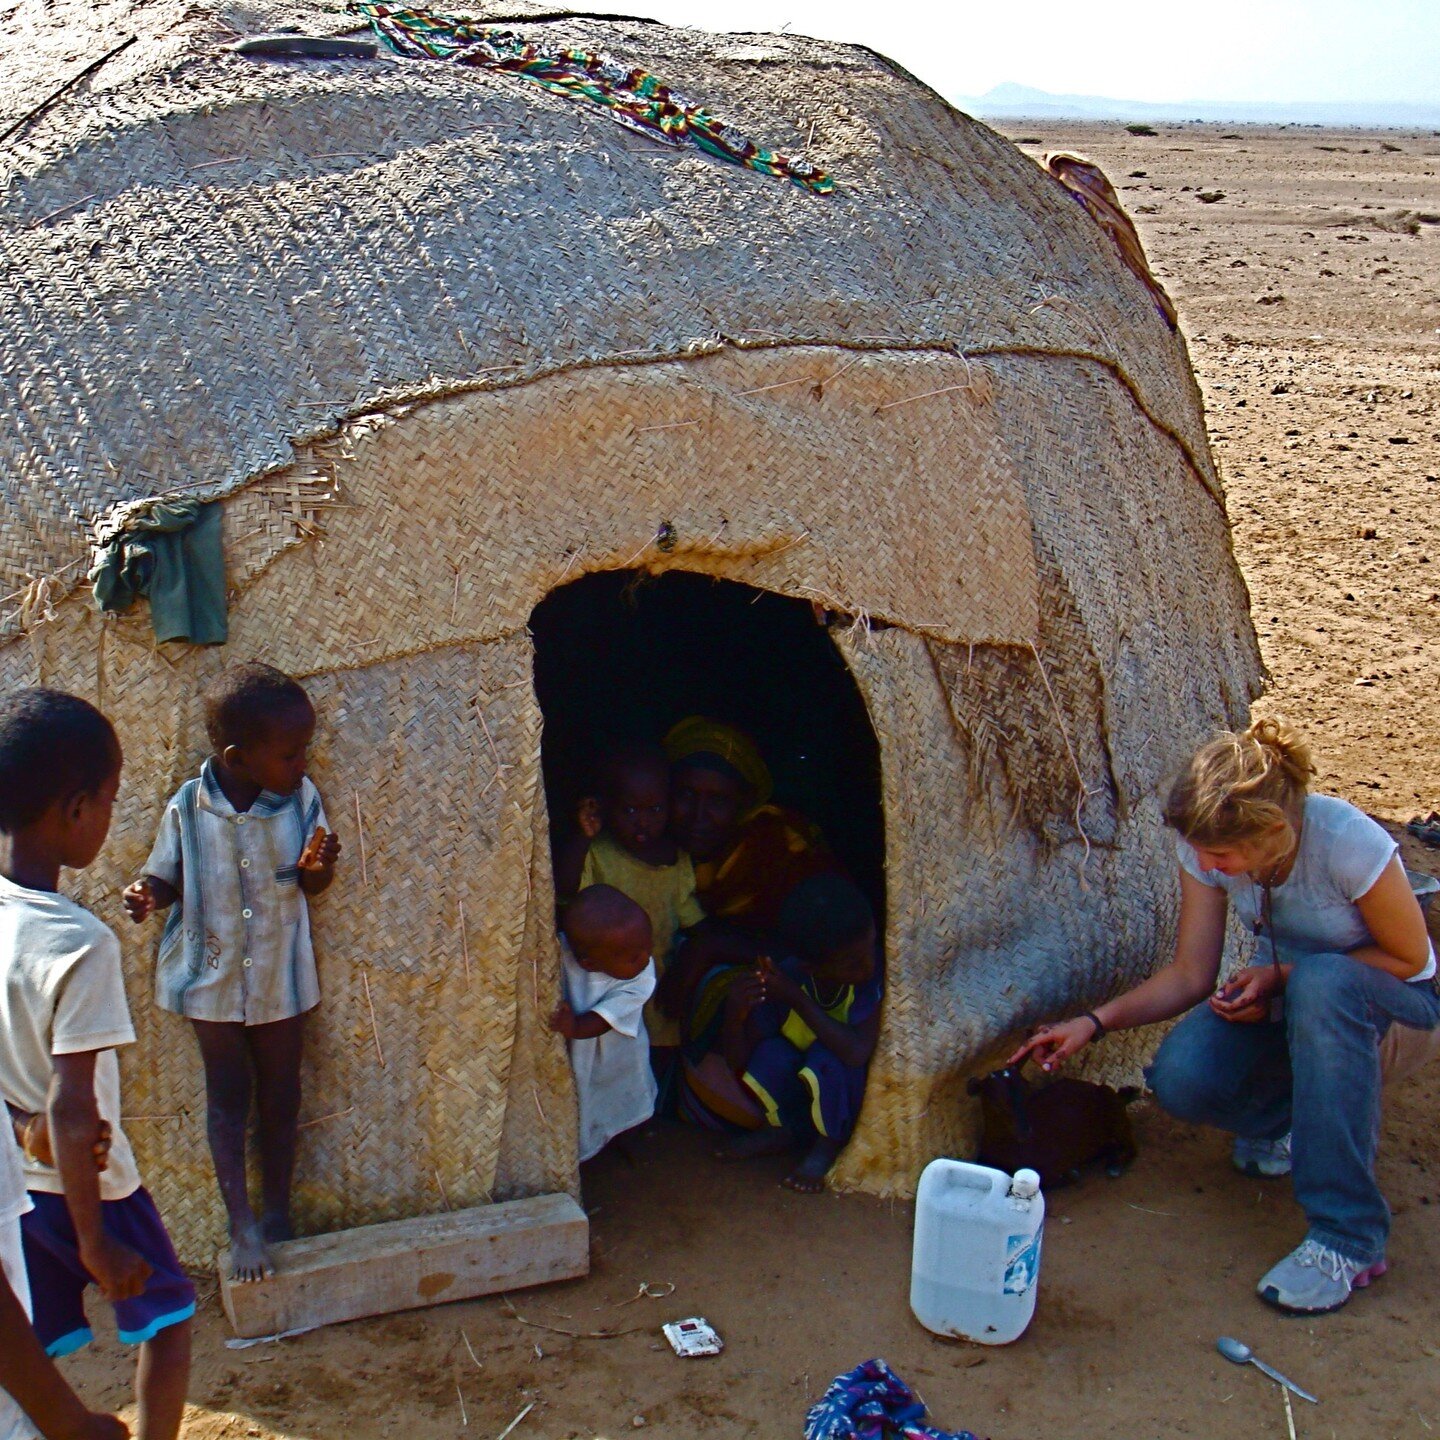 Most people in our modern Western world don't have any concept of how rude life is for so many. Here my daughter Alicia outside a &quot;10 person&quot; hut in the blistering hot plains of the Dankali depression. Futile arguments against giving birth 